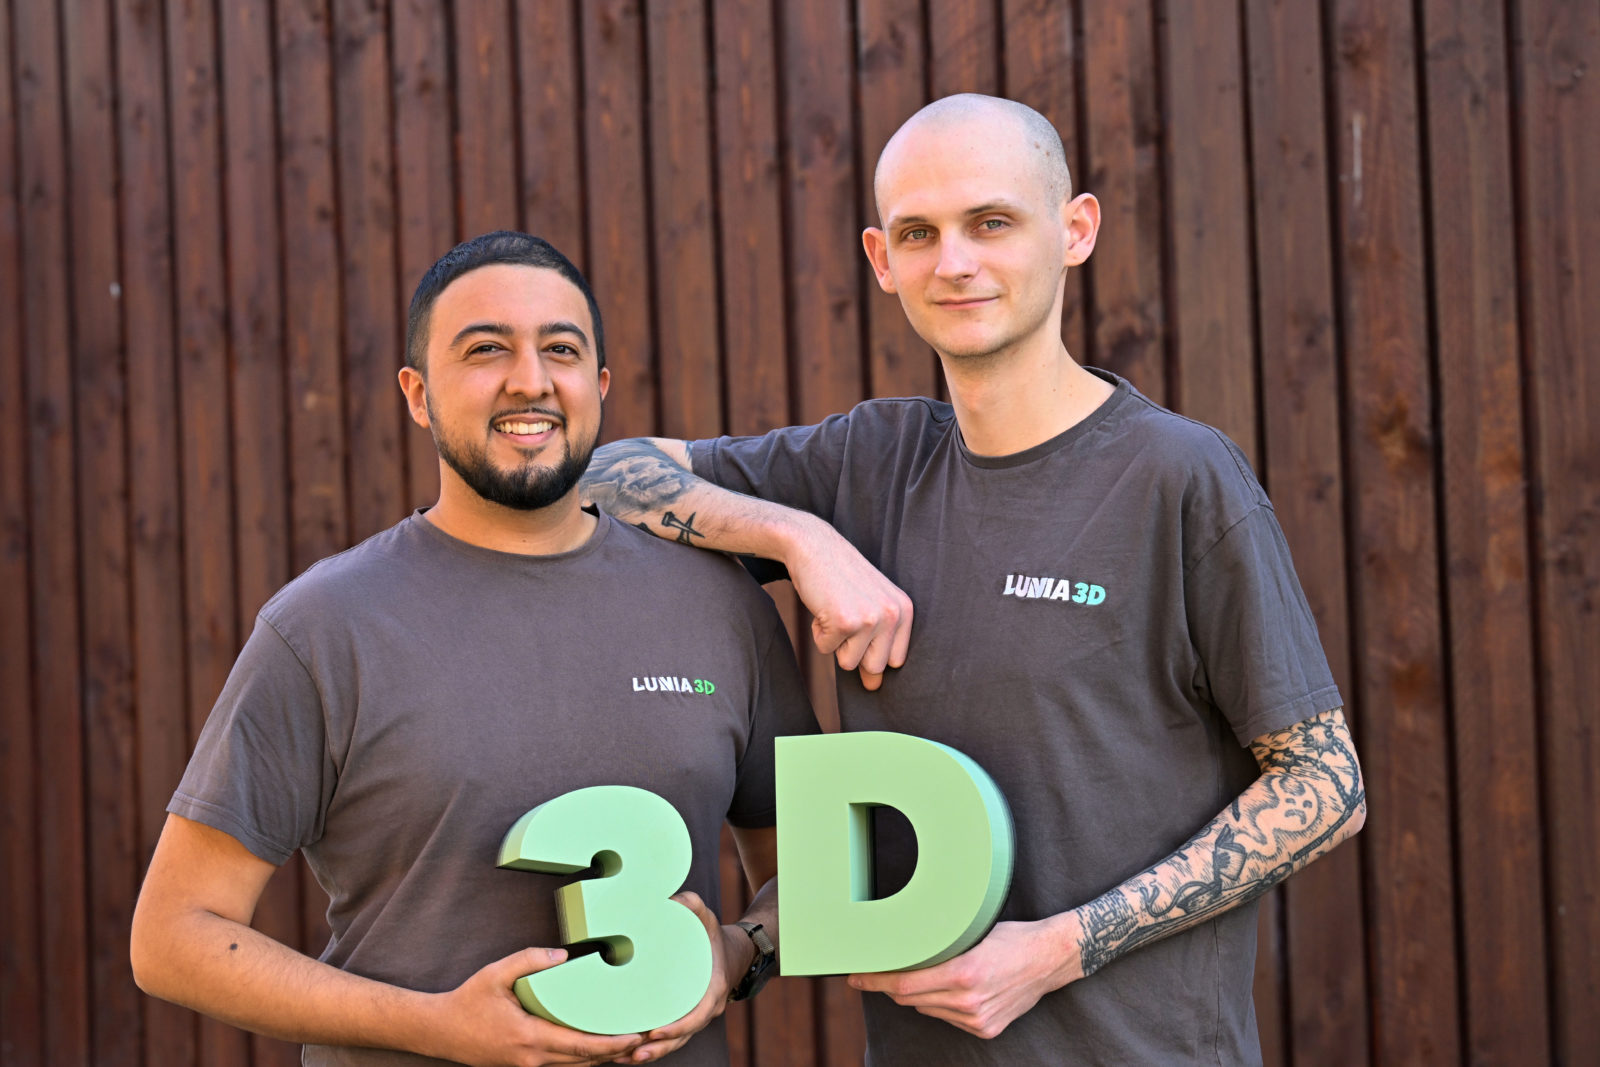 Learn More About Lunia 3D - Our Mission & Expertise